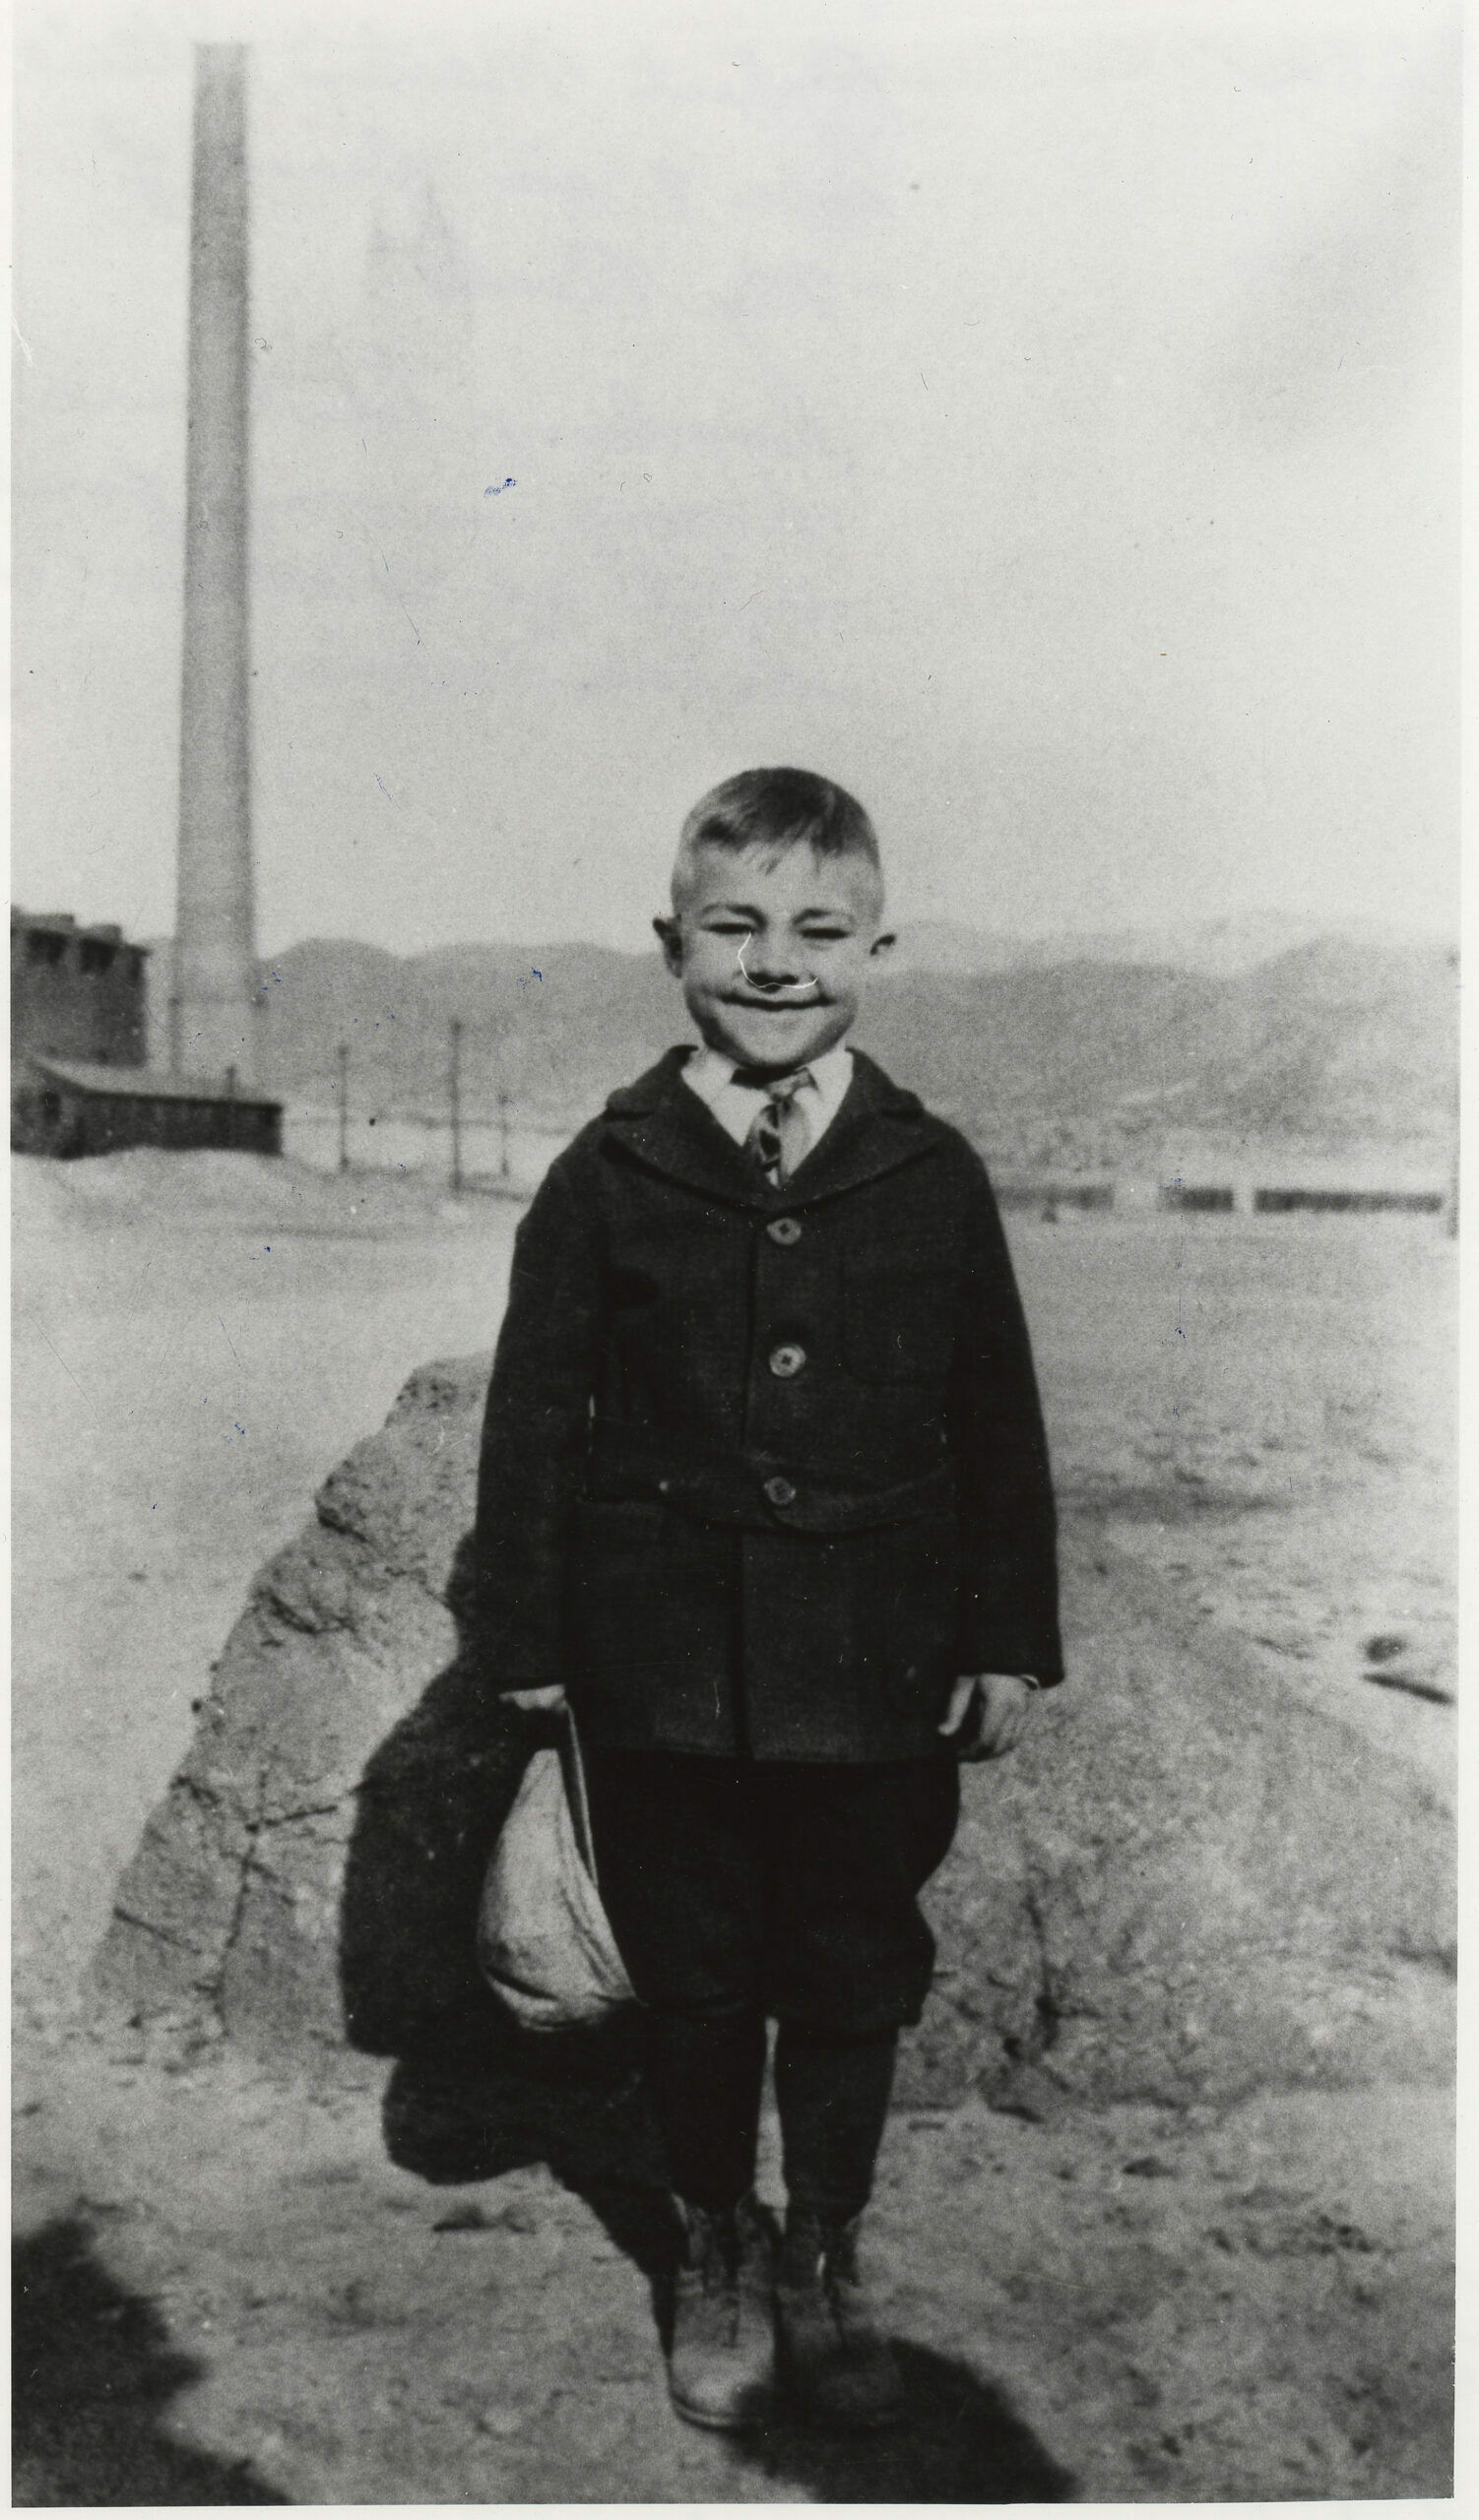 1919 – Robert Martin Stein, age 7, in front of “My Rock” looking East, and happy in his first suit of clothes (home-made).